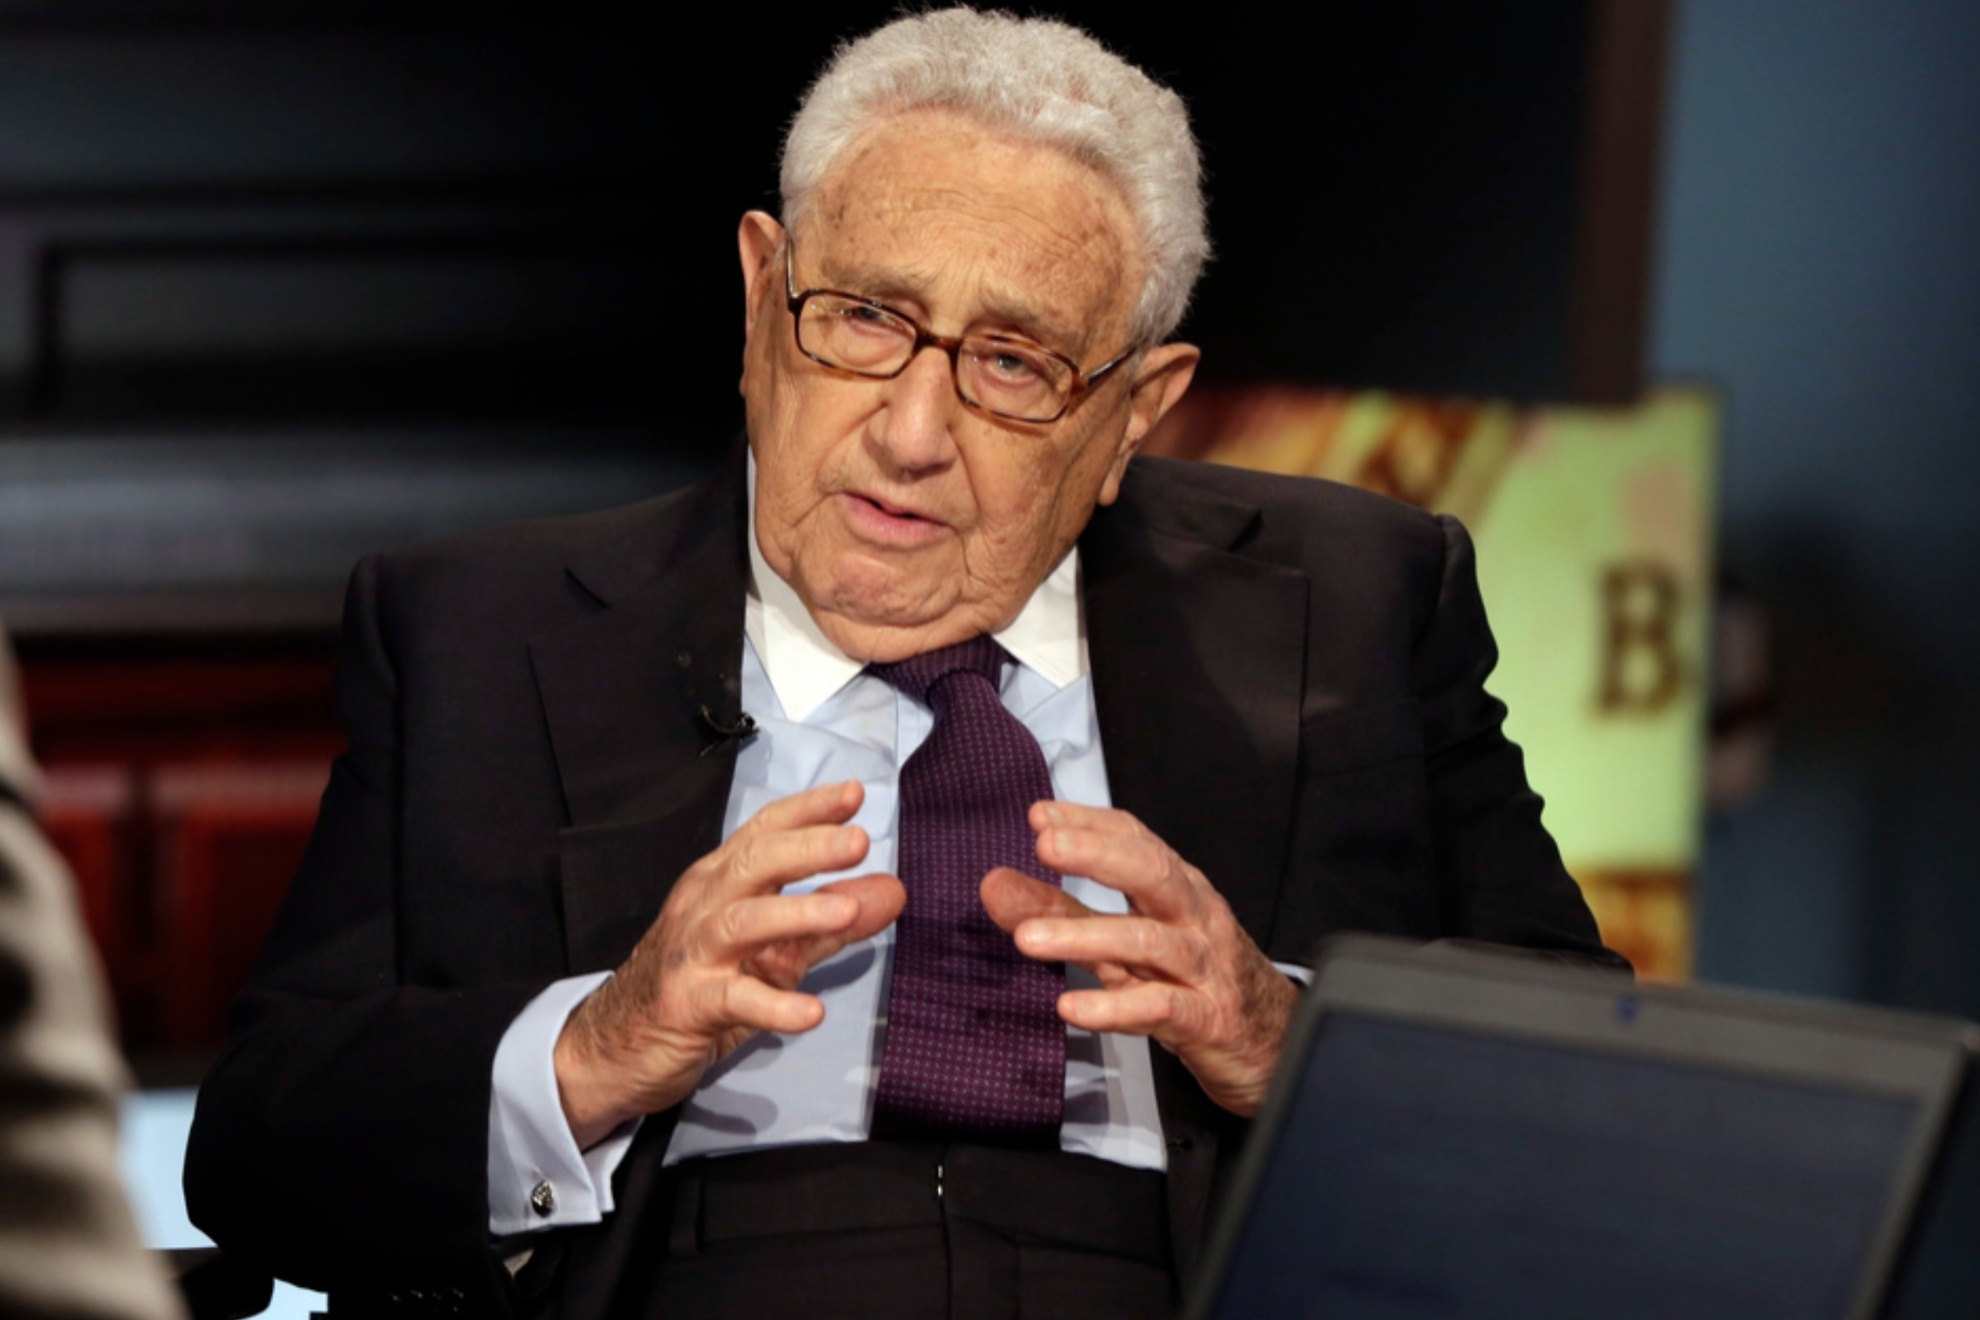 Henry Kissinger, who died on Wednesday, was born in Fuerth, Germany